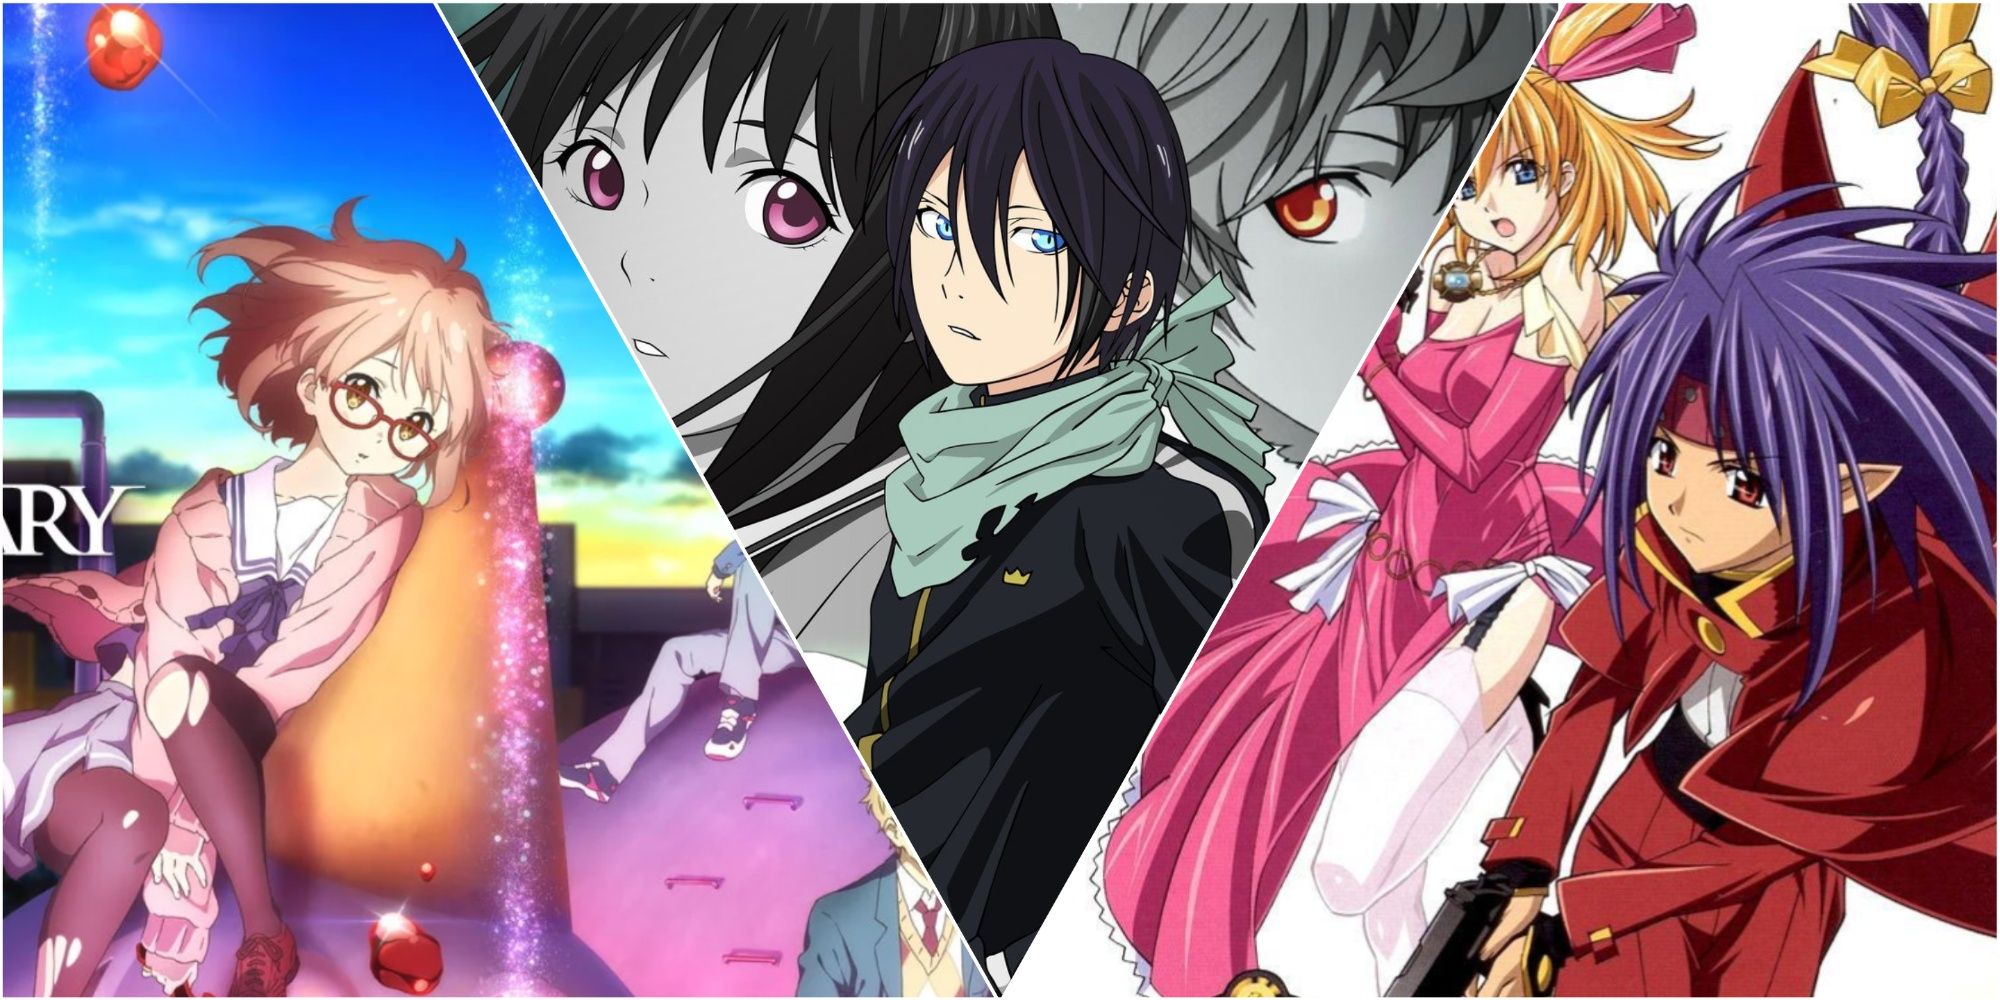 Noragami Manga Comes To An End After More Than 10 Years